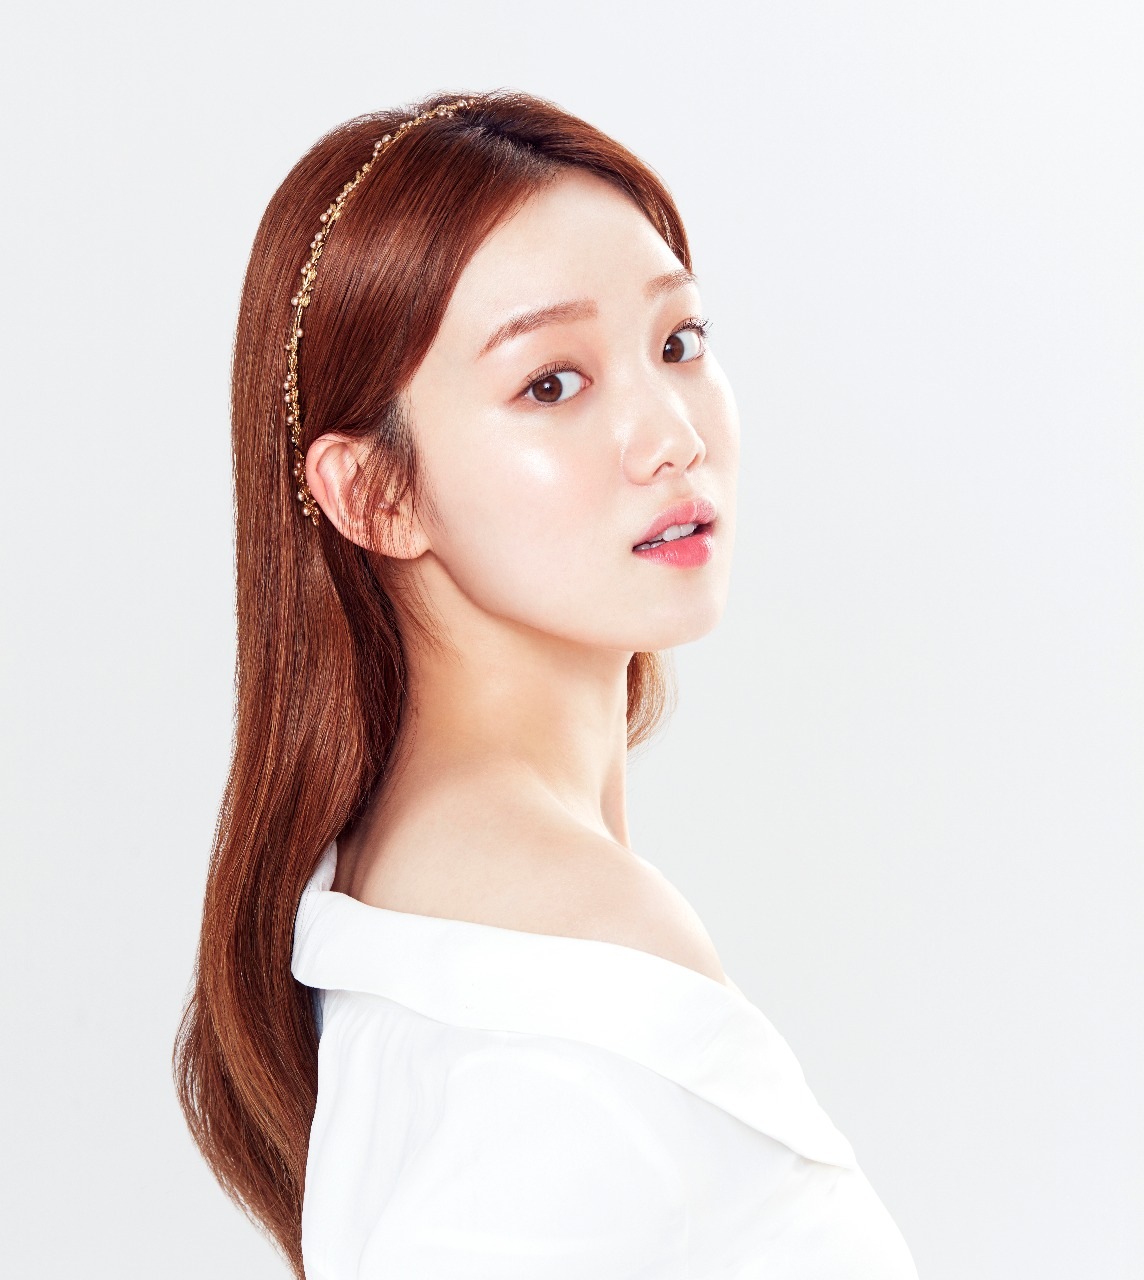 Lee Sung Kyung to Make Appearance at LANEIGE Beauty Road 